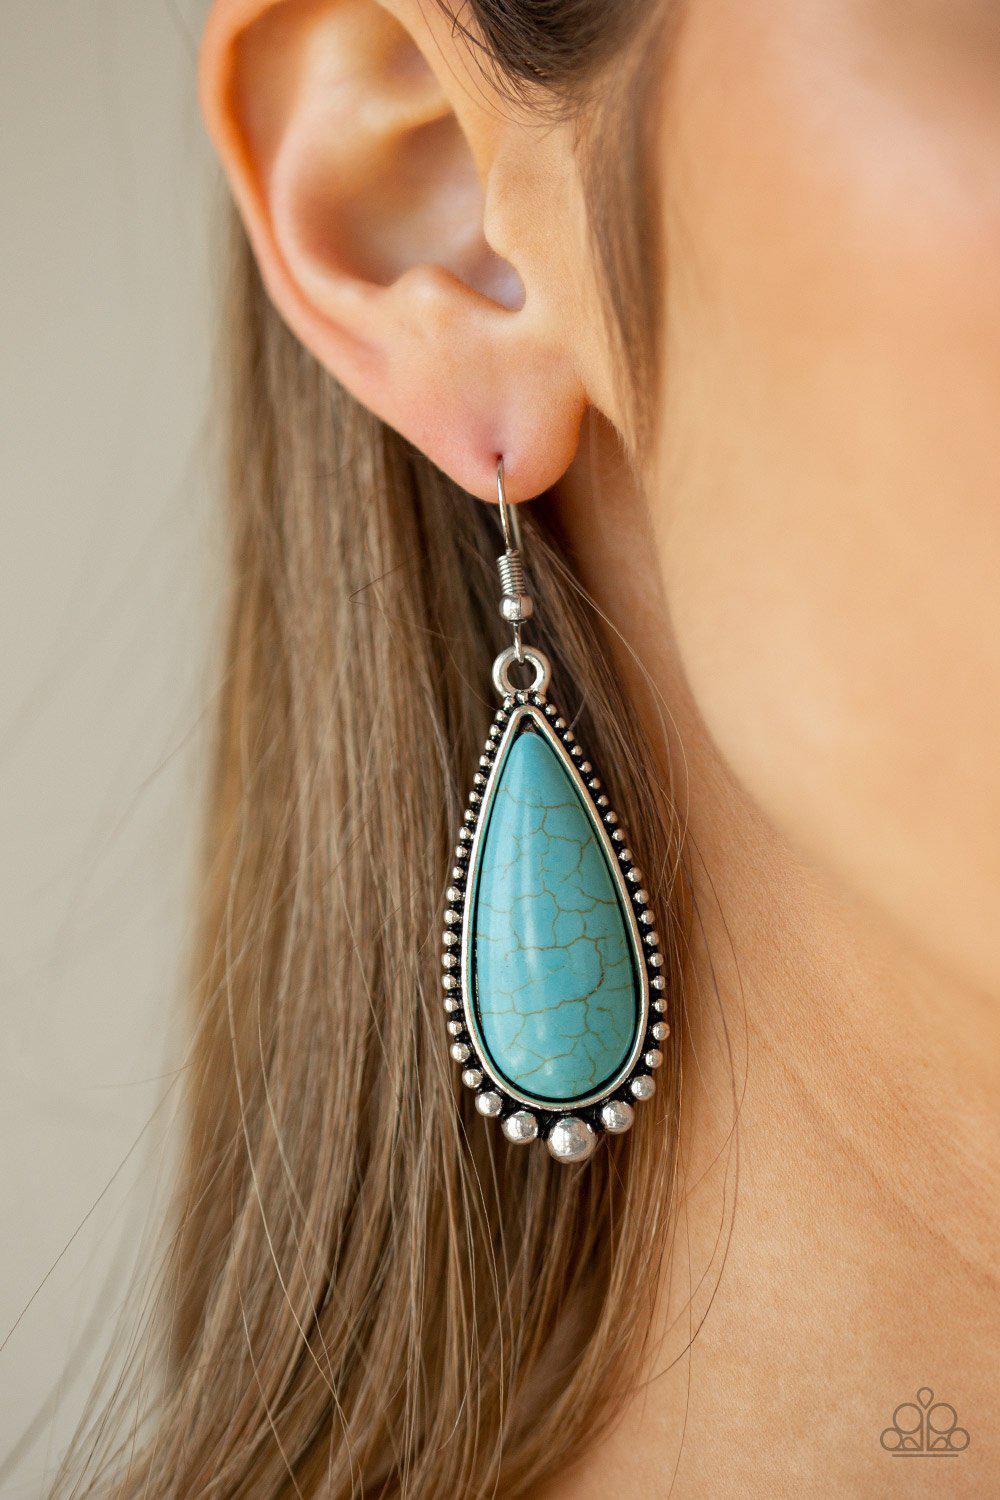 Desert Quench Turquoise Blue Stone Teardrop Earrings - Paparazzi Accessories-CarasShop.com - $5 Jewelry by Cara Jewels